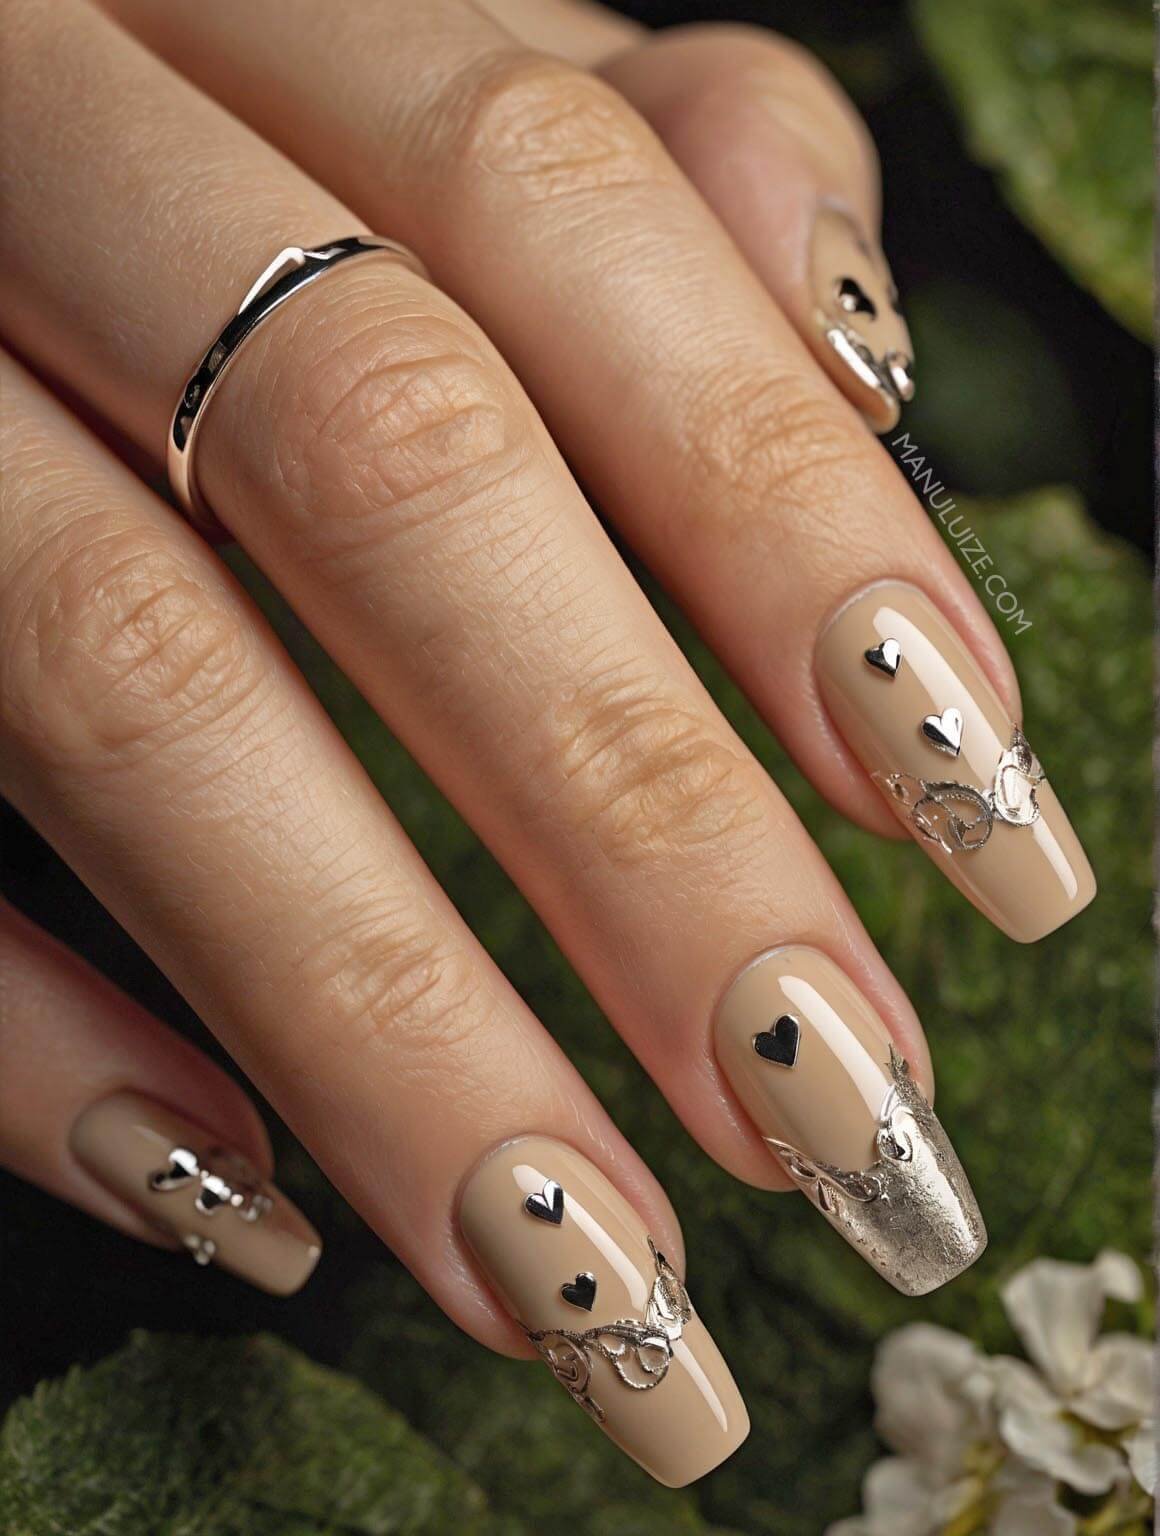 Nude nails with silver hearts